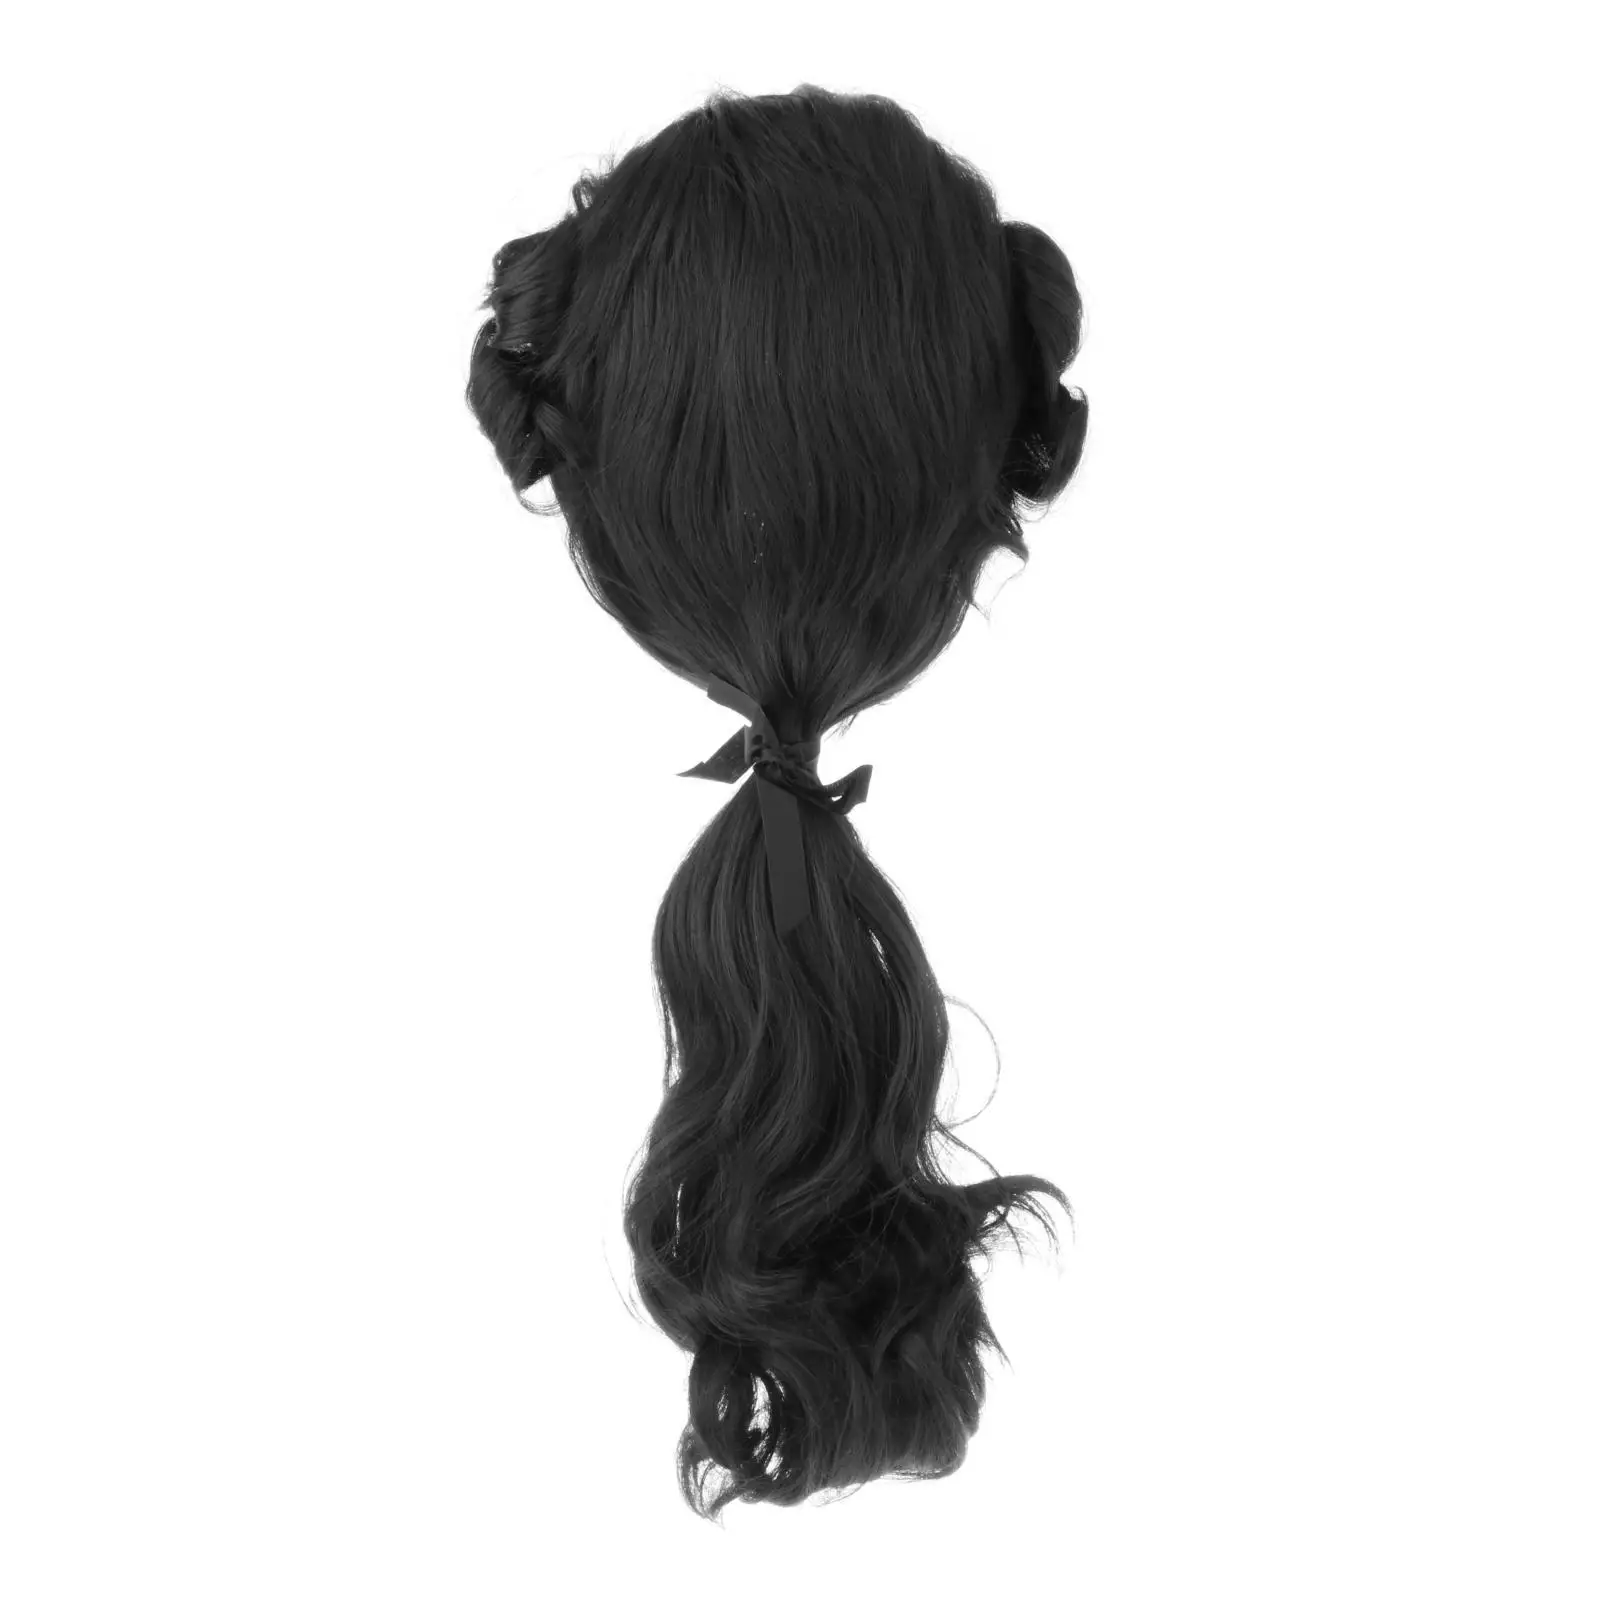 Colonial Wig Halloween Wigs Synthetic Hair Wigs Adjustable Theme Party Women Men with Ponytail Comfortable Anime Show Synthetic